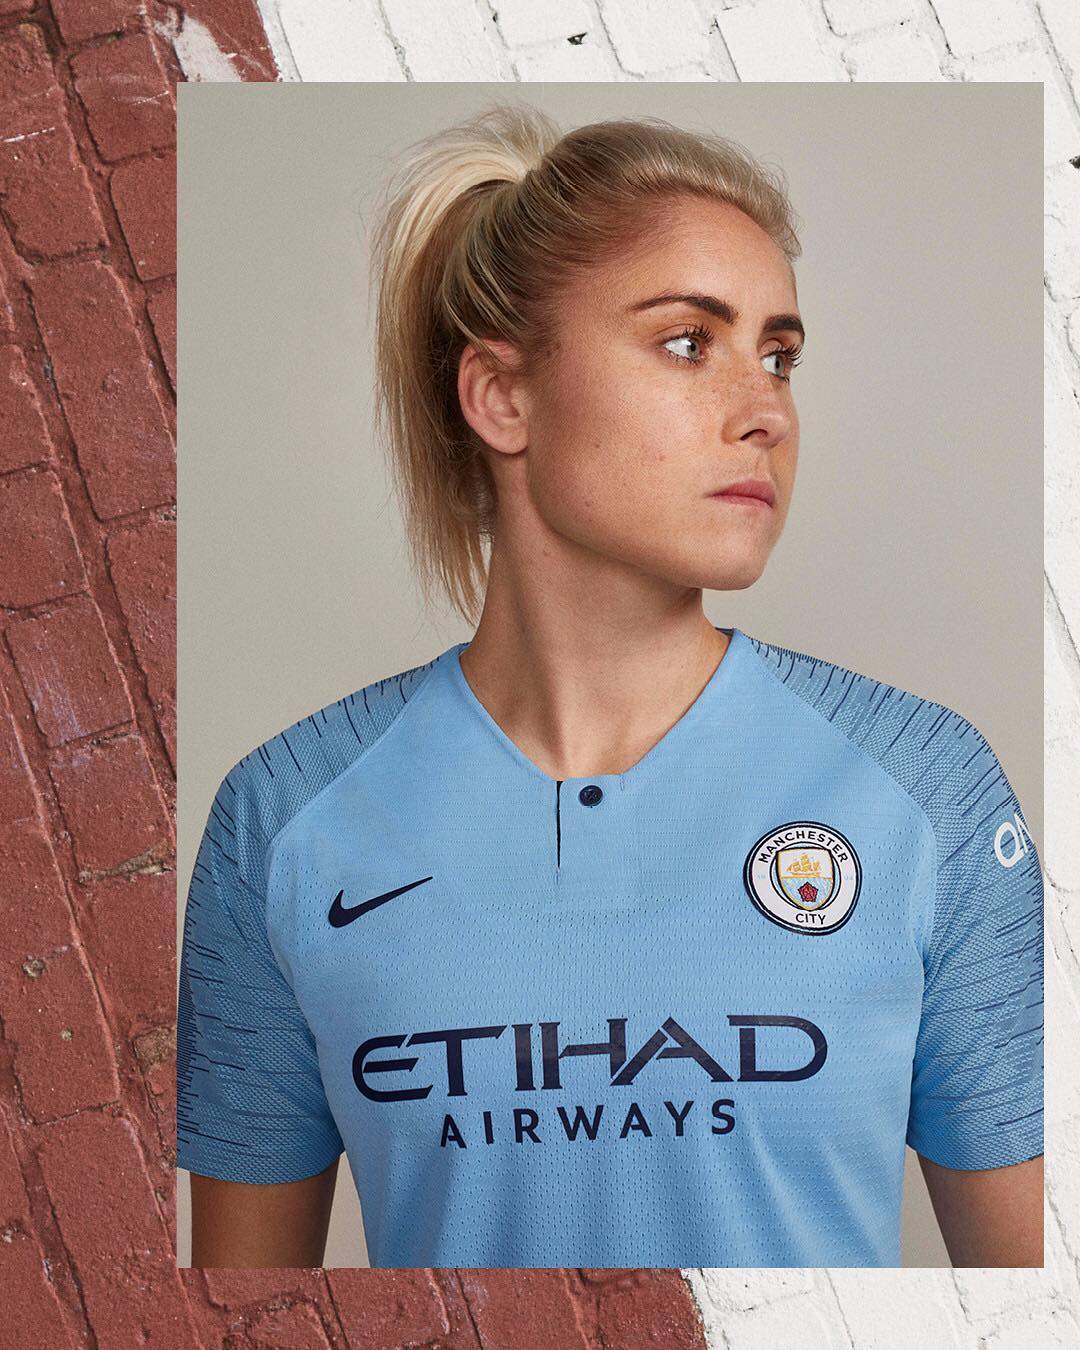 51 Hot Pictures Of Steph Houghton Will Heat Up Your Blood With Fire And Energy For This Sexy Diva 75